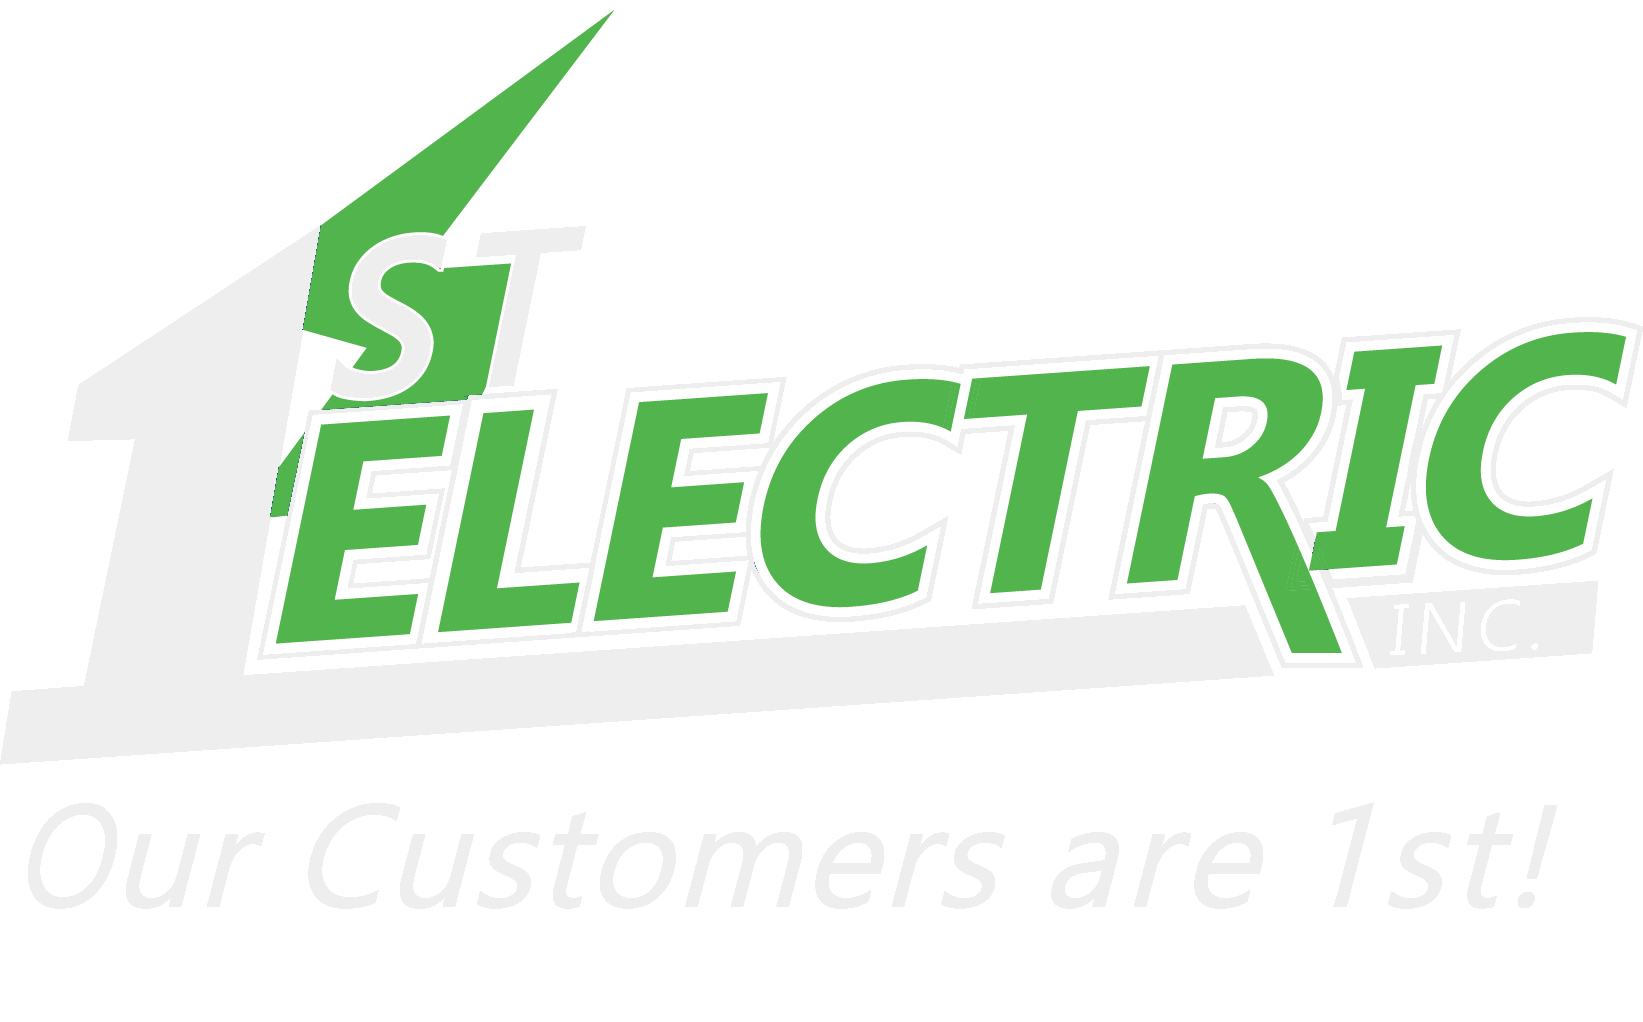 1st Electric